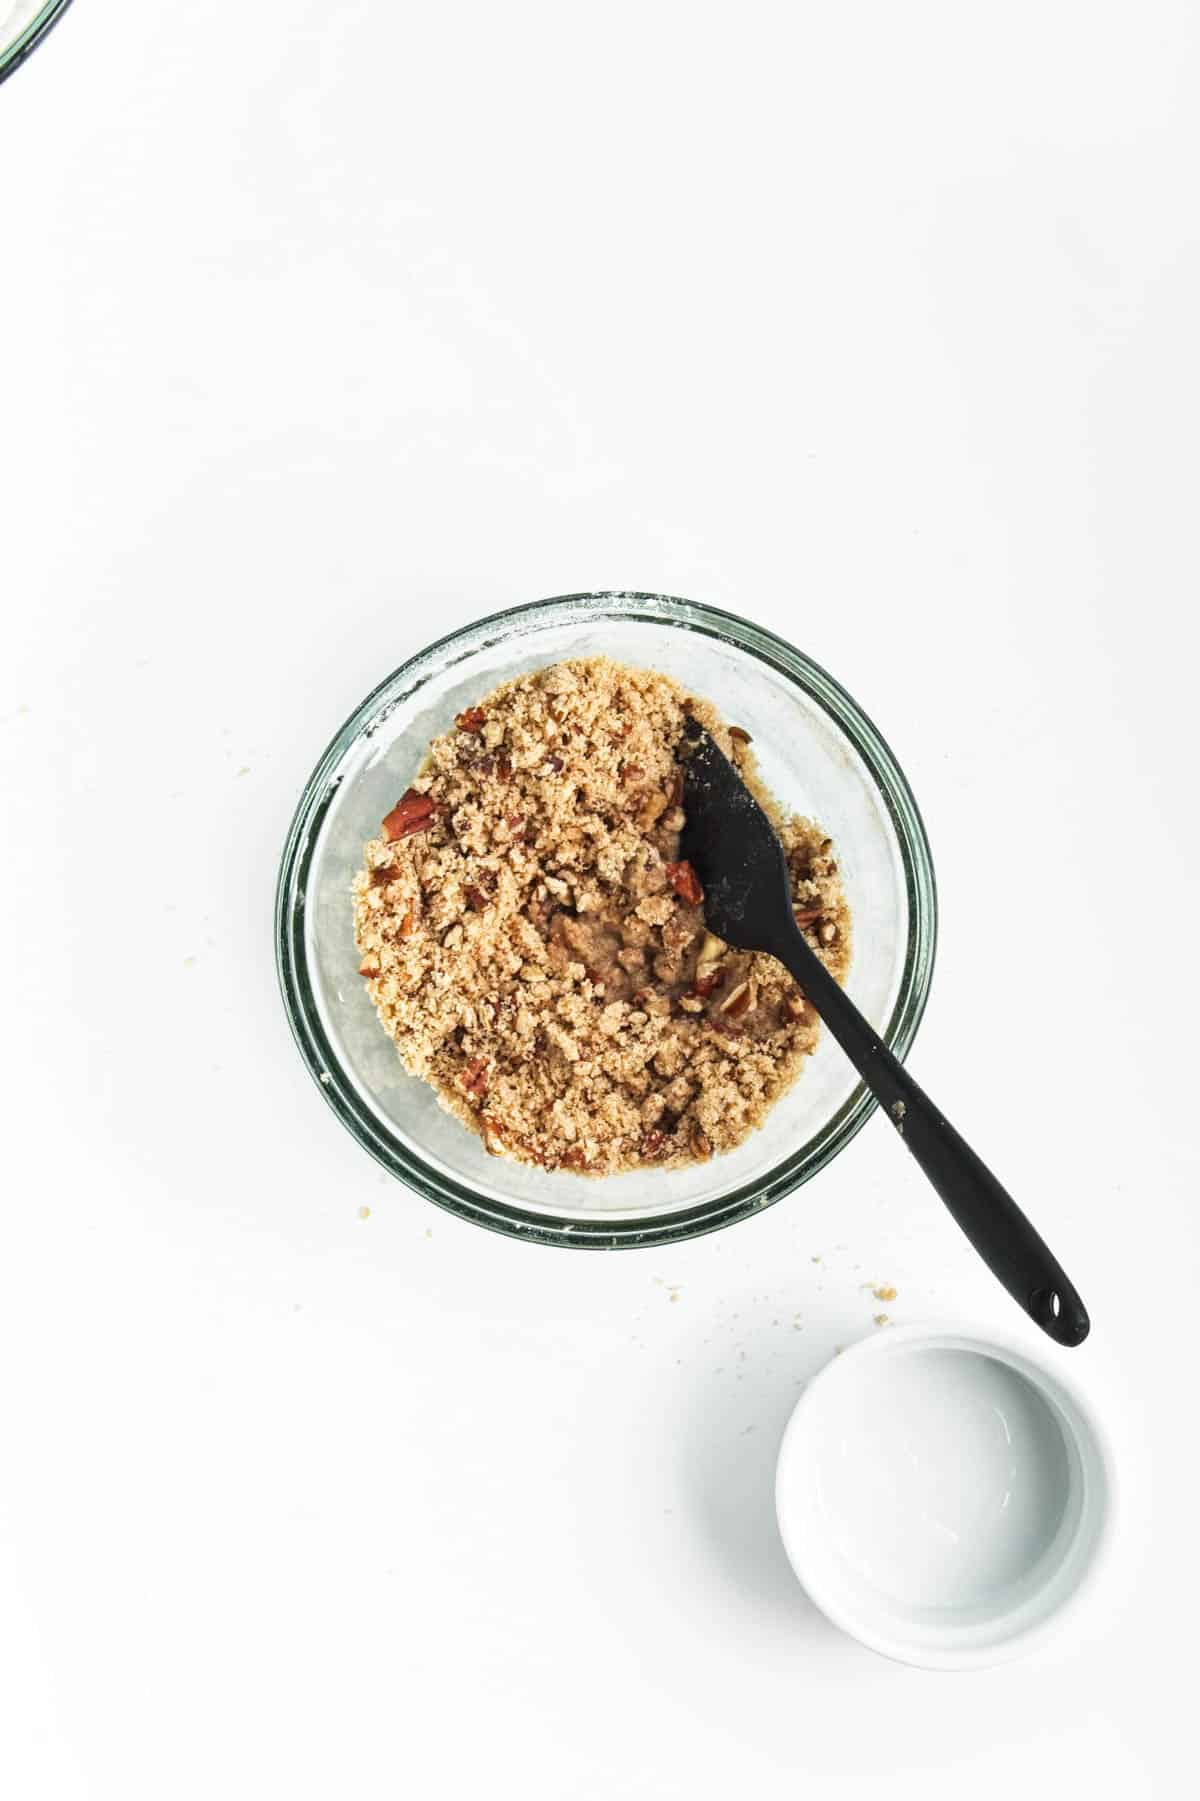 Streusel in a glass bowl with a black spatula.